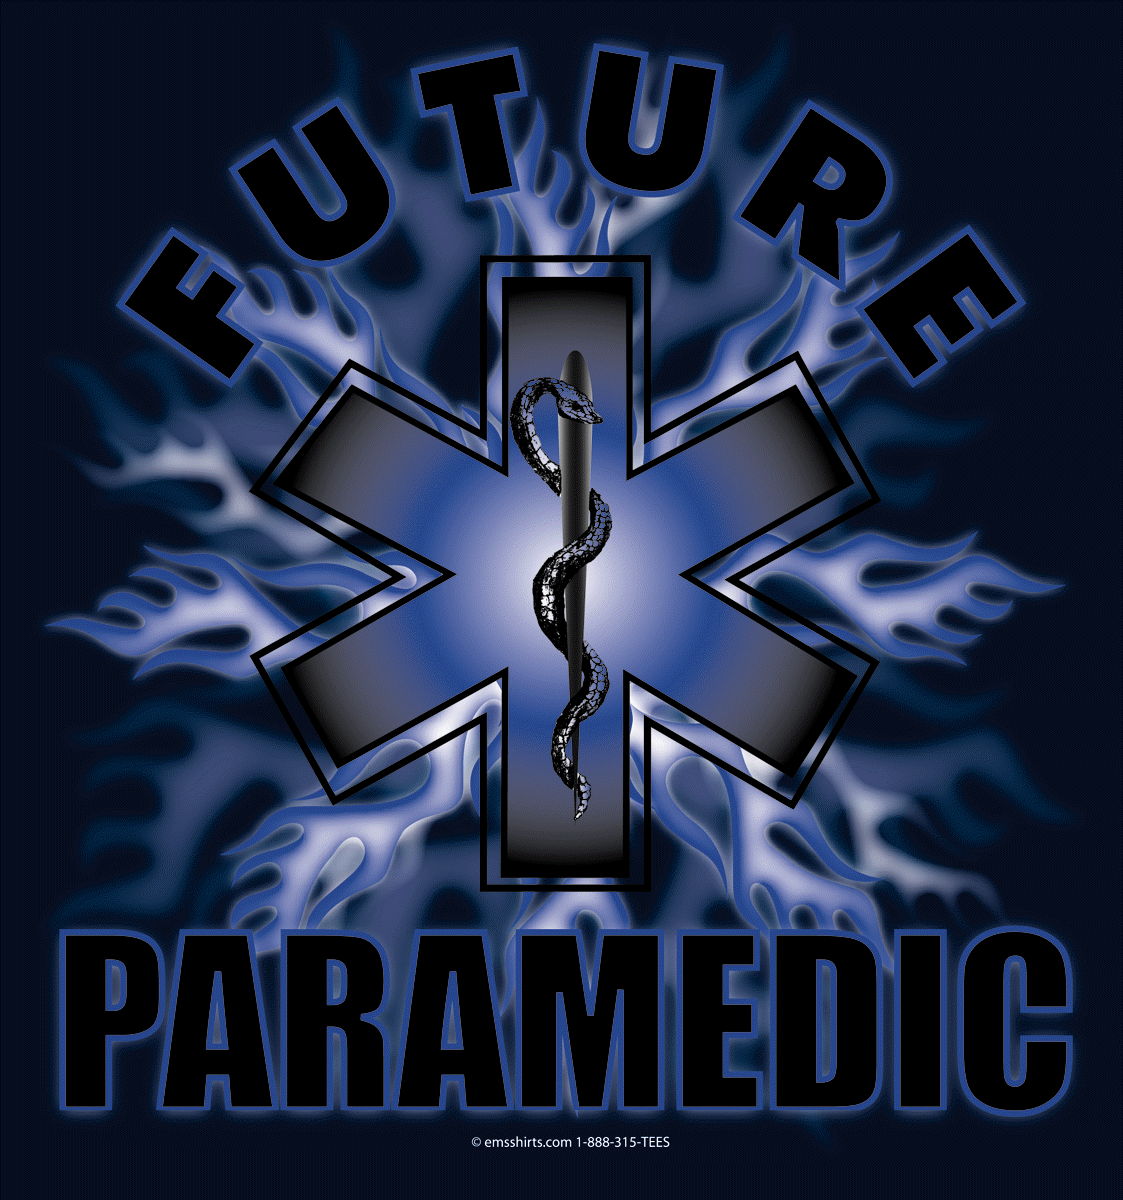 Wallpaper request for Paramedics  Android Central